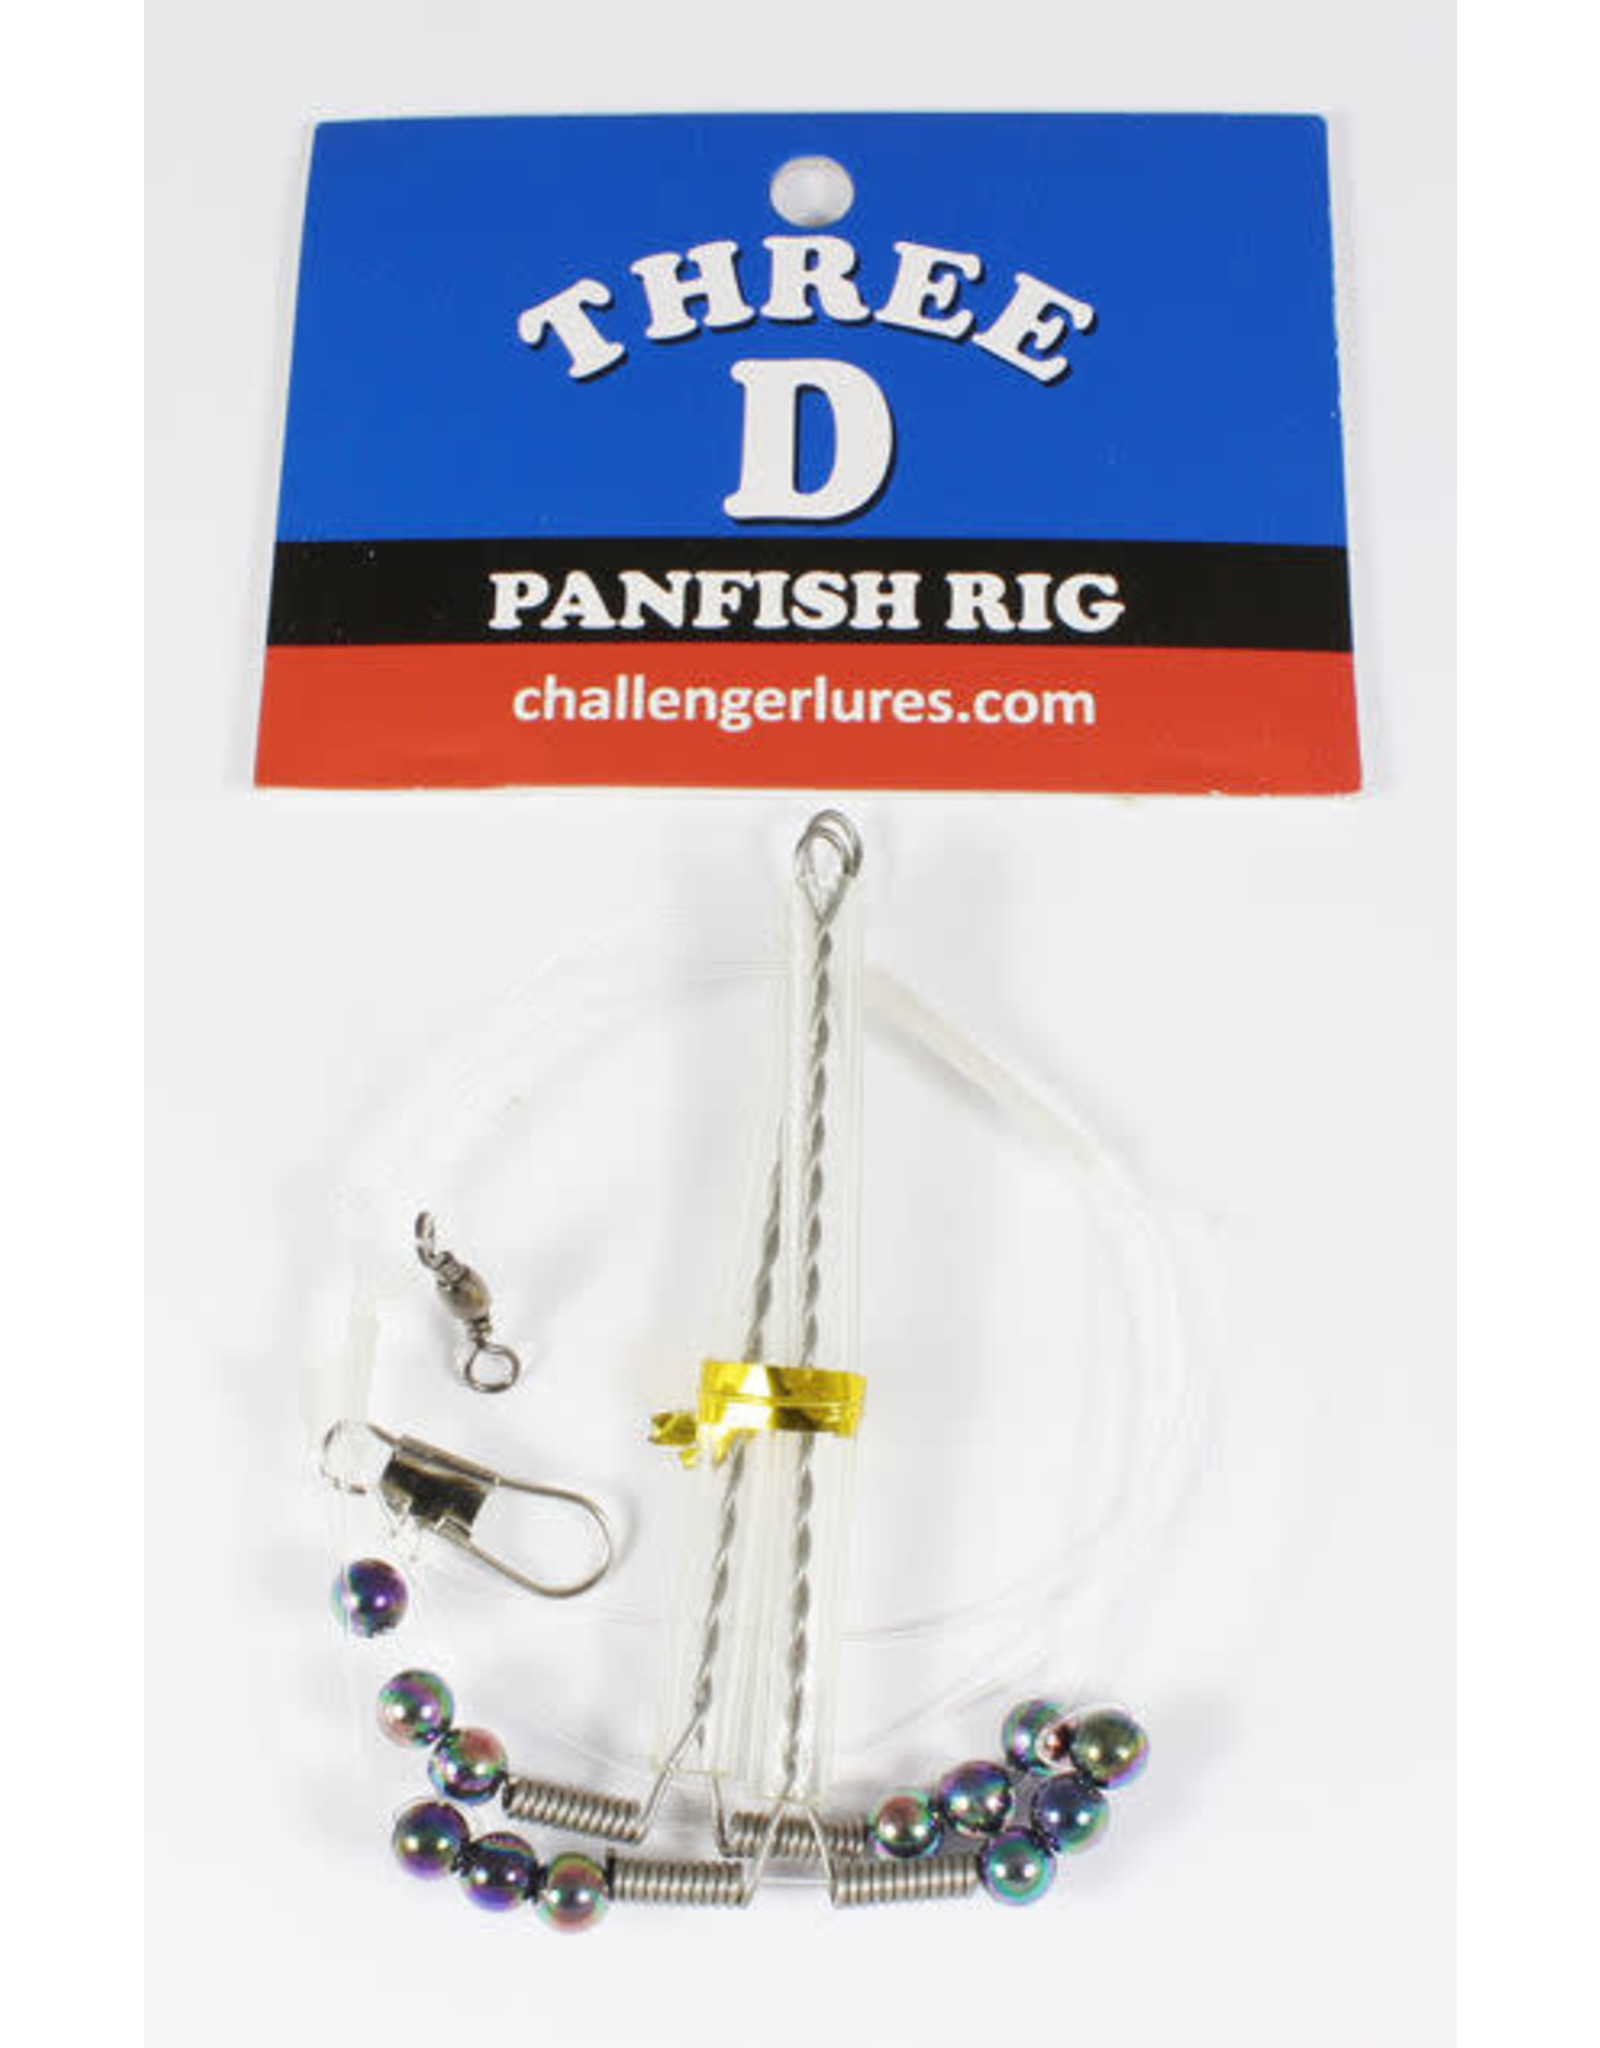 Challenger Three D panfish rig, 2 arm florocarbon with Blades